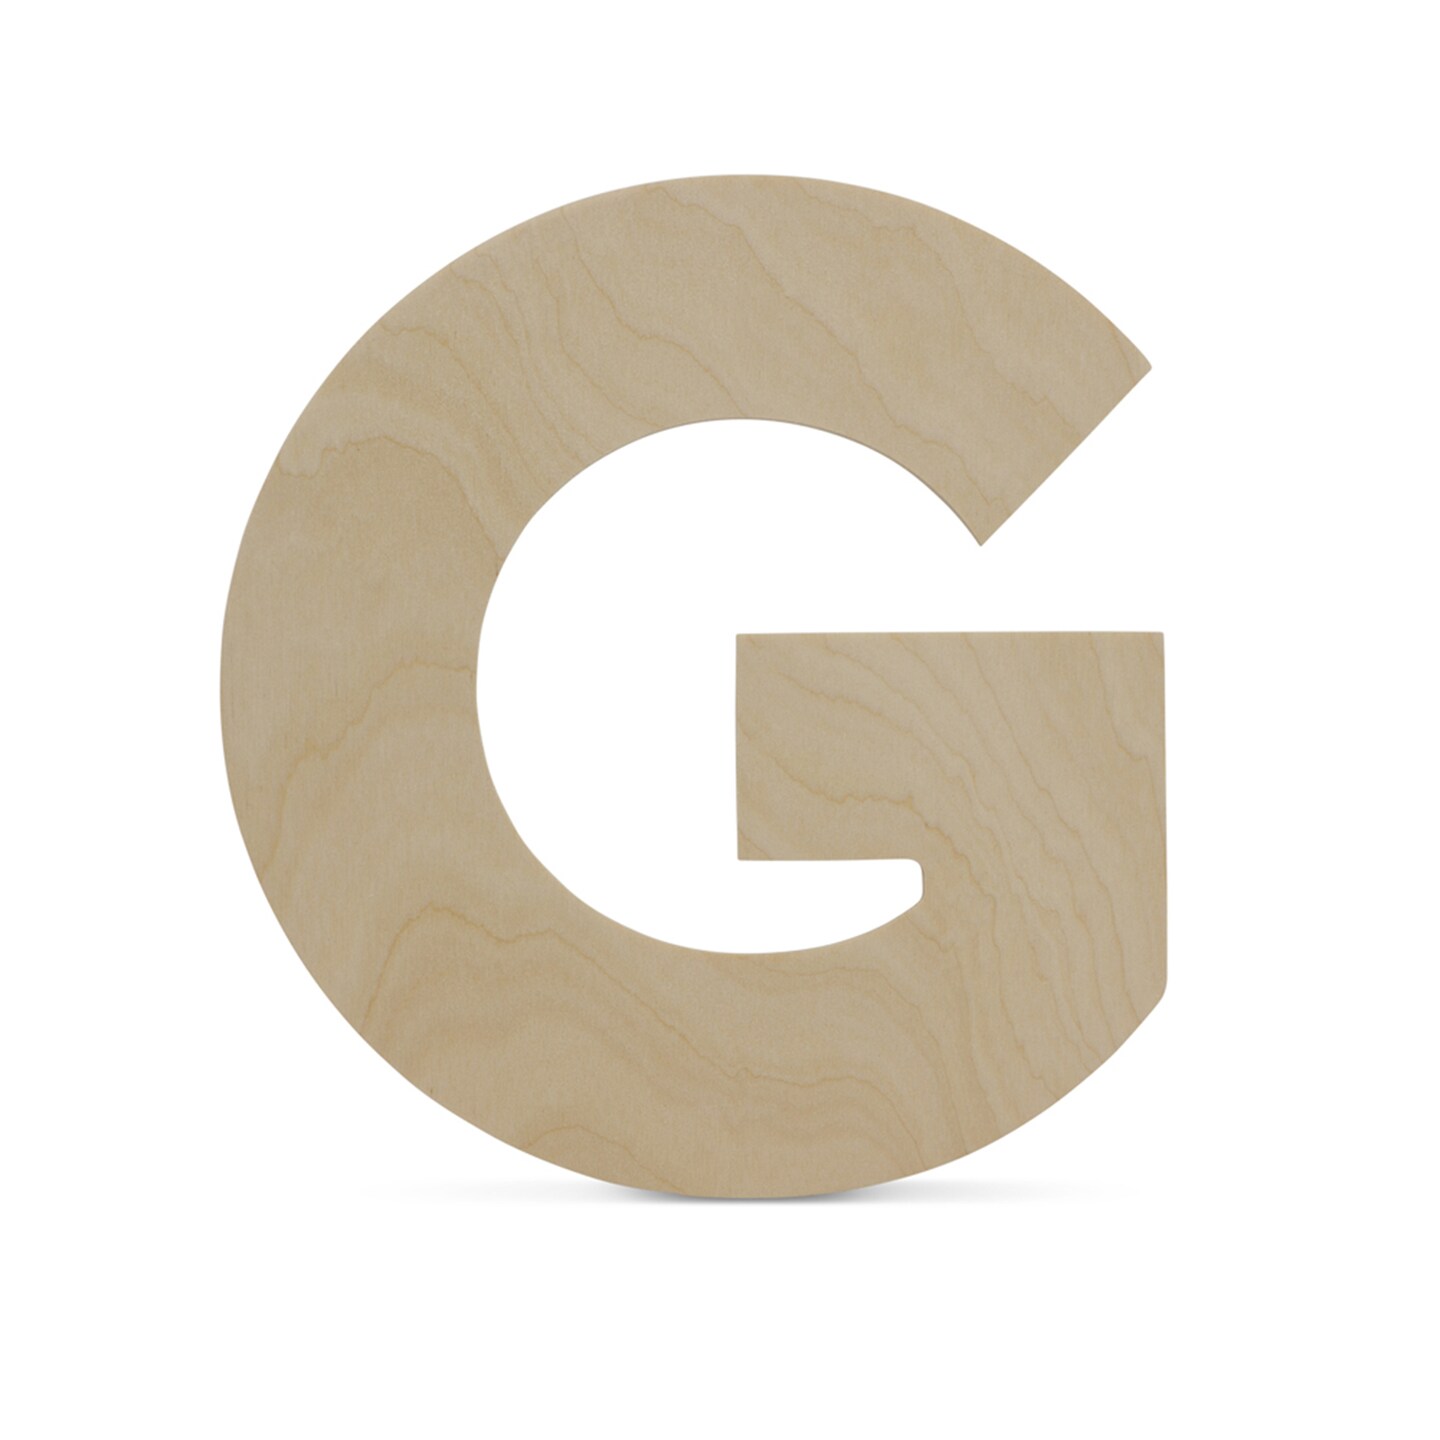 Wooden Letter G 12 inch or 8 inch, Unfinished Large Wood Letters for Crafts | Woodpeckers